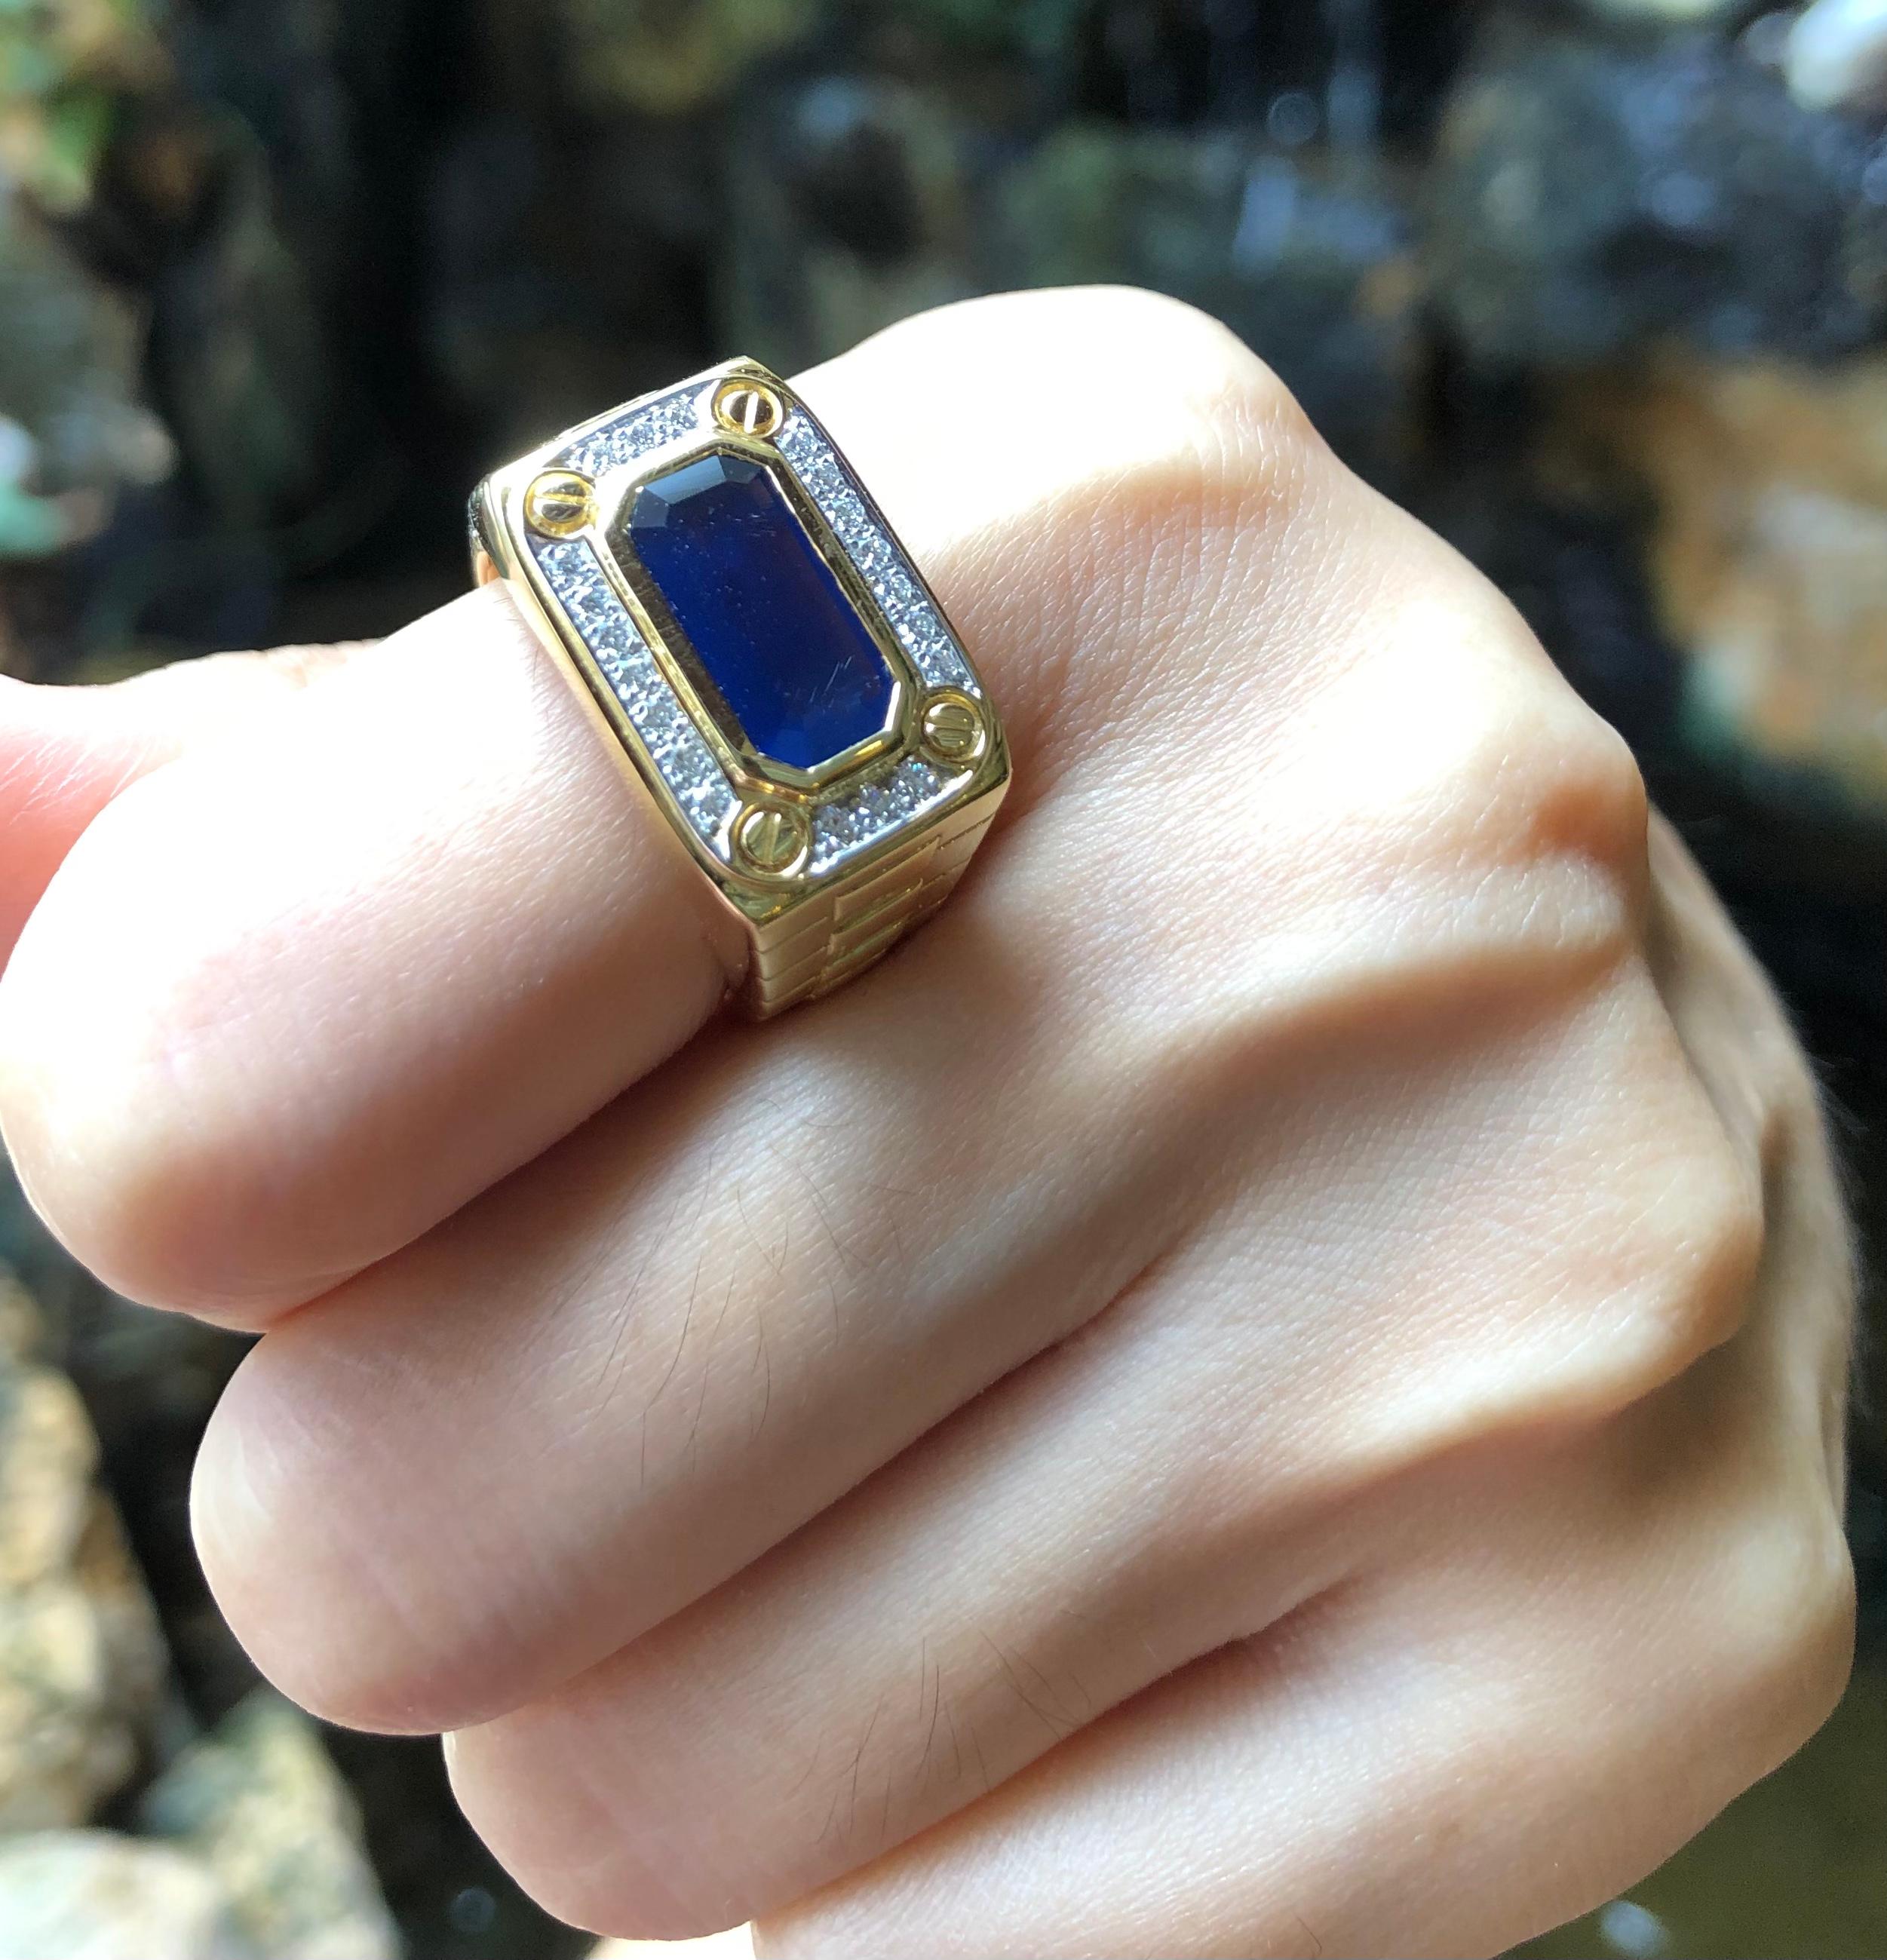 Blue Sapphire 2.26 carats with Diamond 0.21 carat Ring set in 18 Karat Gold Settings

Width:  2.0 cm 
Length: 1.3 cm
Ring Size: 58
Total Weight: 18.11 grams

